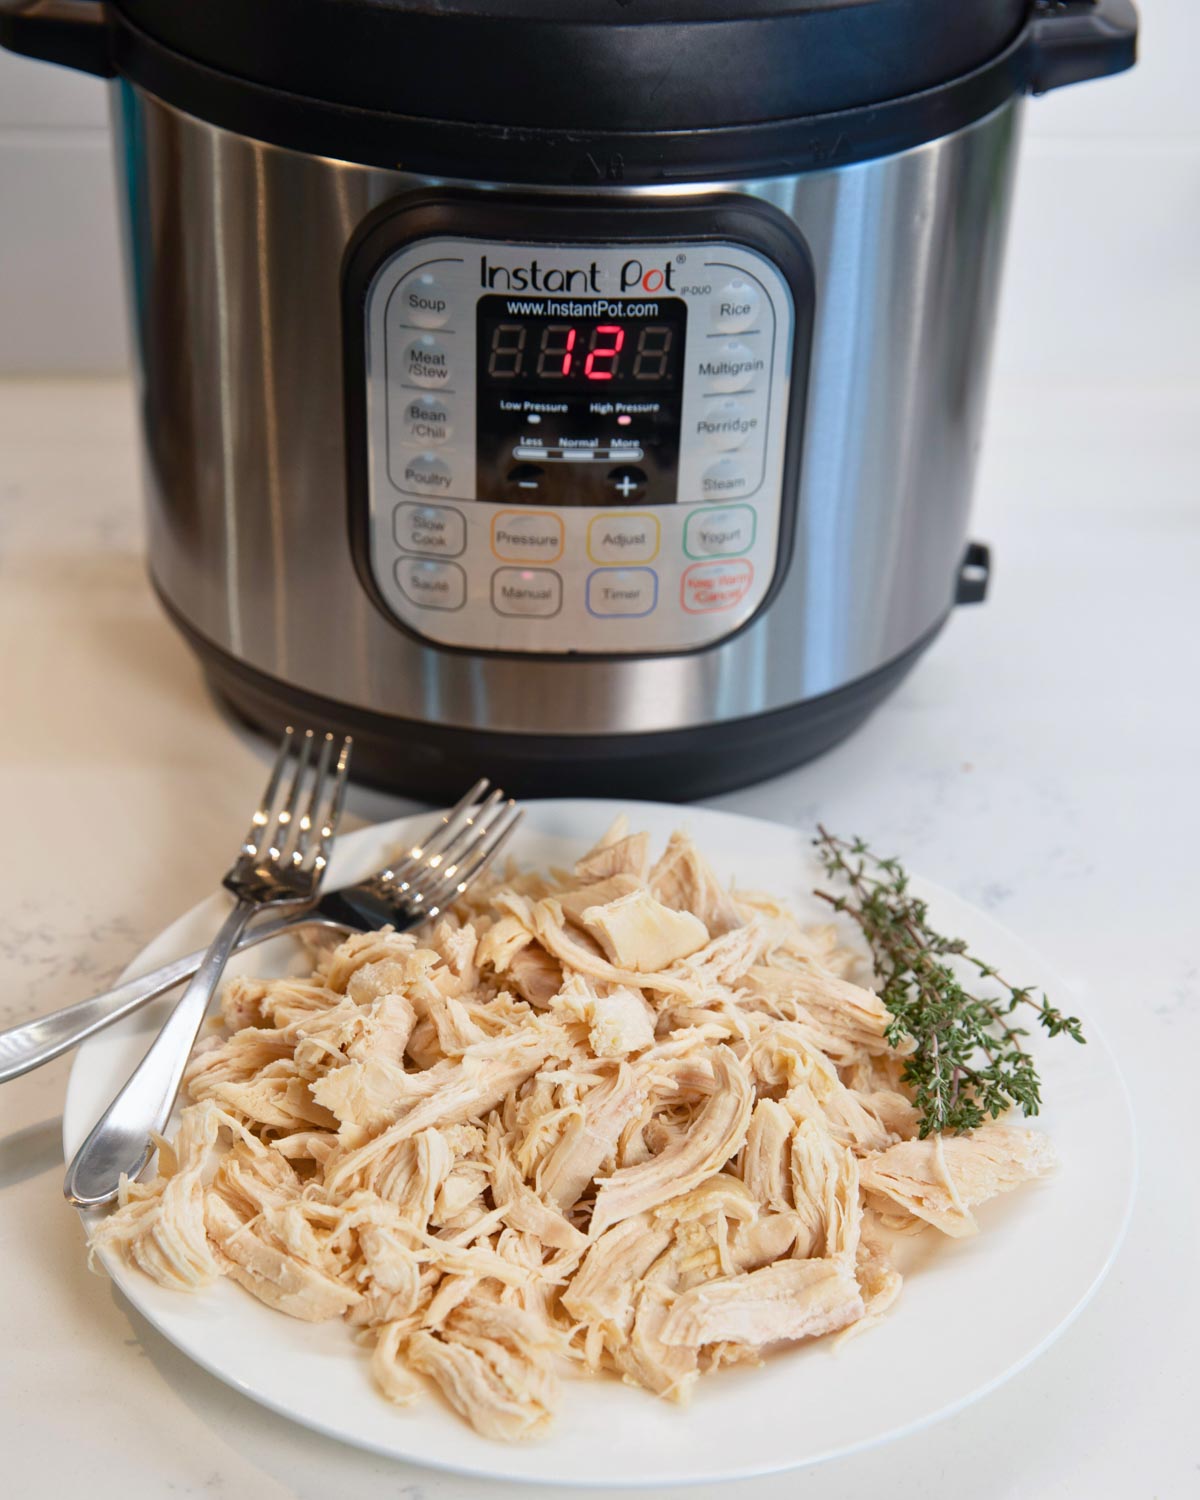 plate of easy instant pot shredded chicken with two forks, instant pot sitting in background.